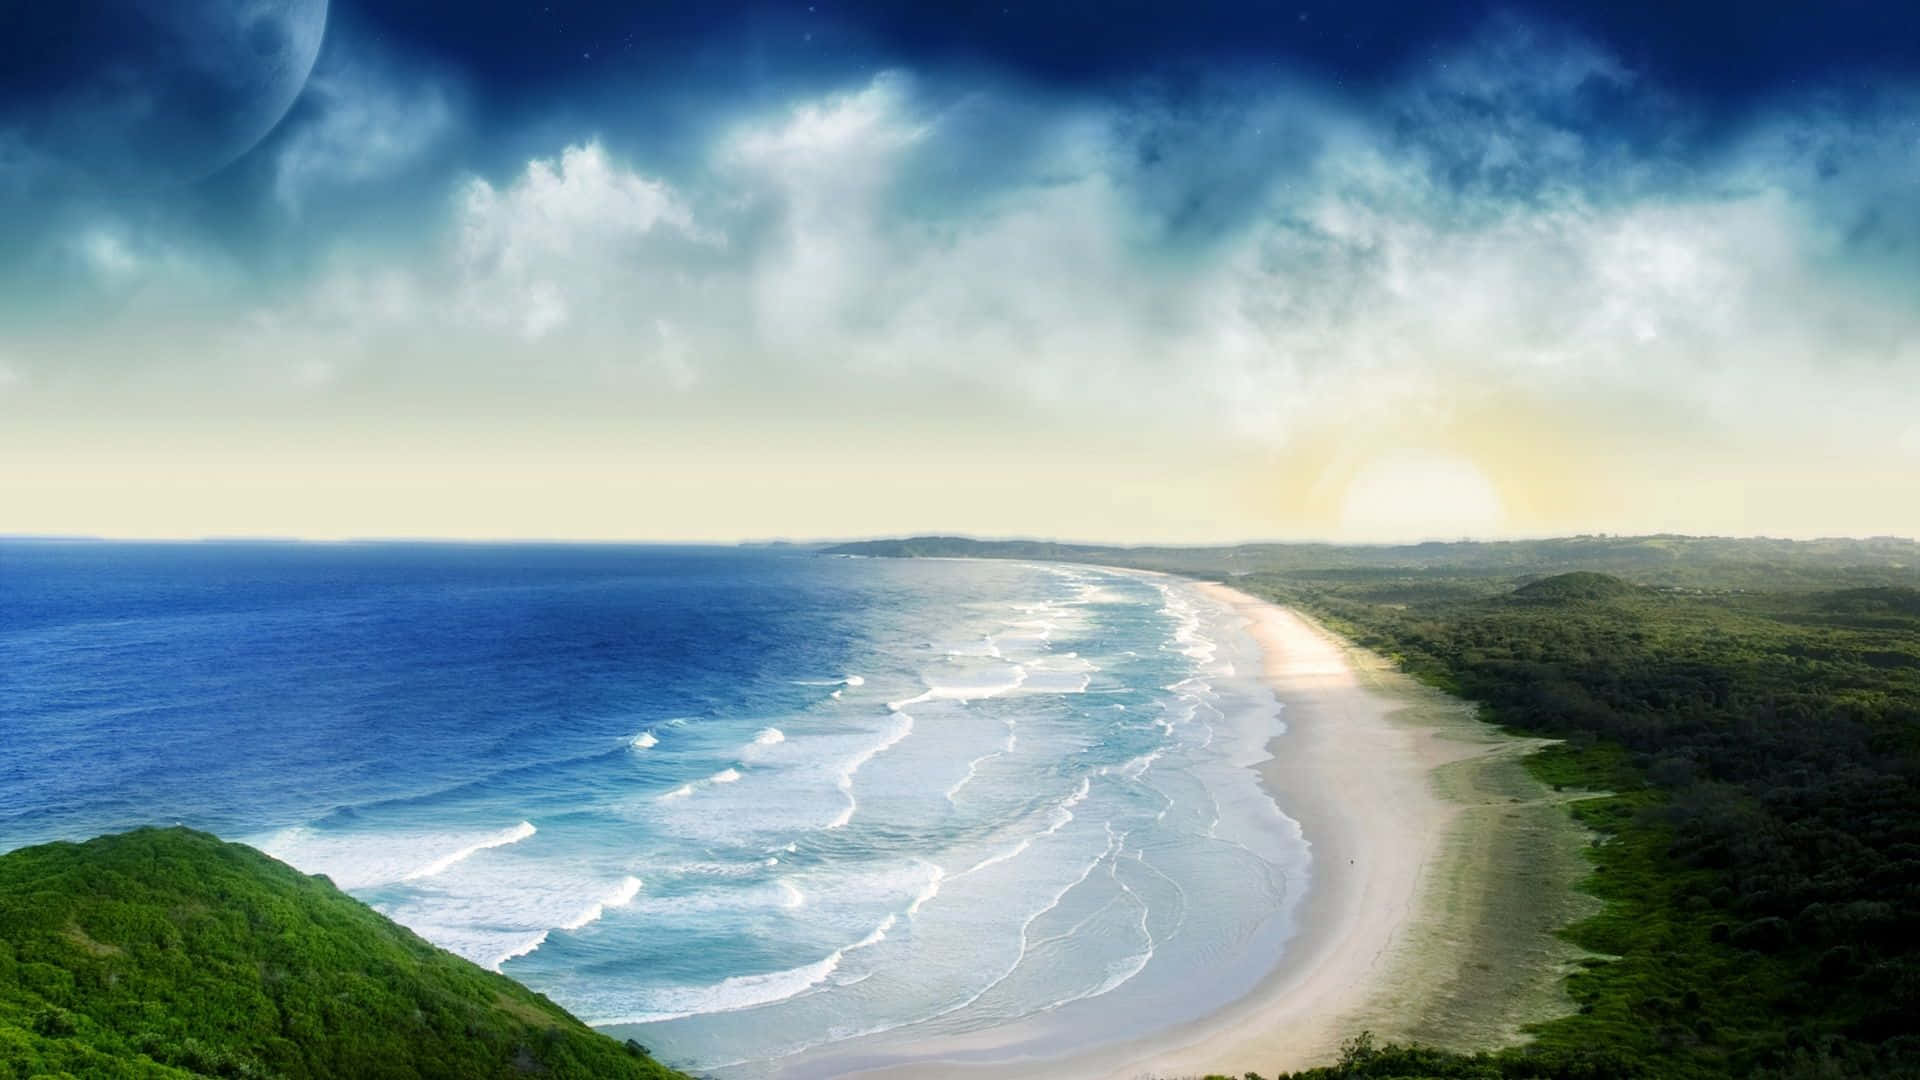 Wide Ocean From A Cliff As A Panoramic Desktop